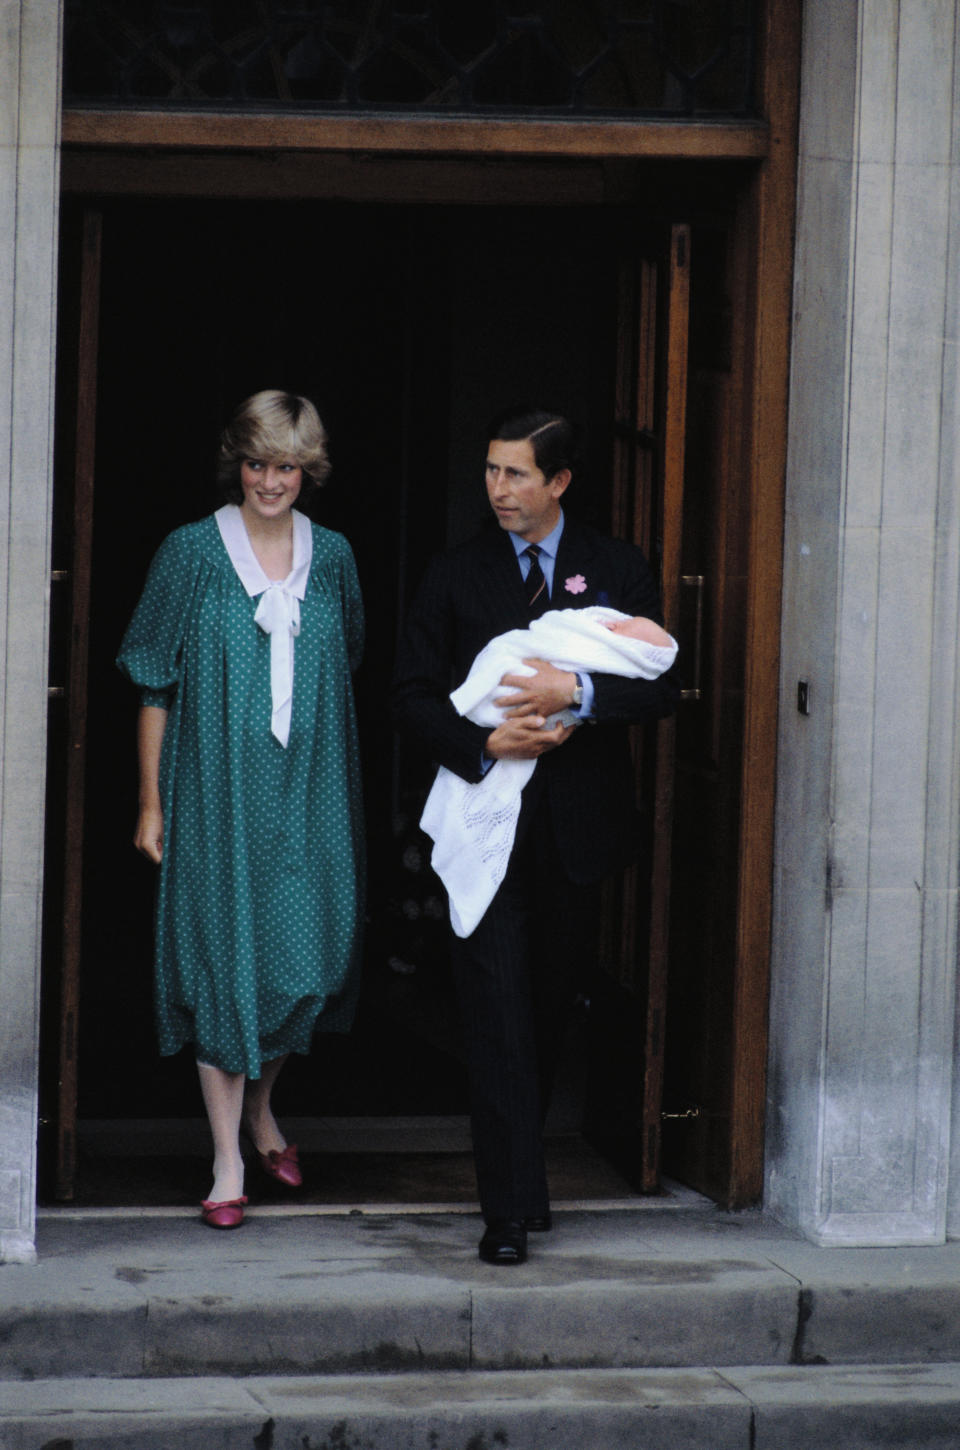 It's interesting to note that when Prince Charles and Princess Diana presented their first child to the world on June 22, 1982, the father held Prince William in his arms. This more modern approach is a tactic later adopted by Prince Harry. [Photo: Getty]